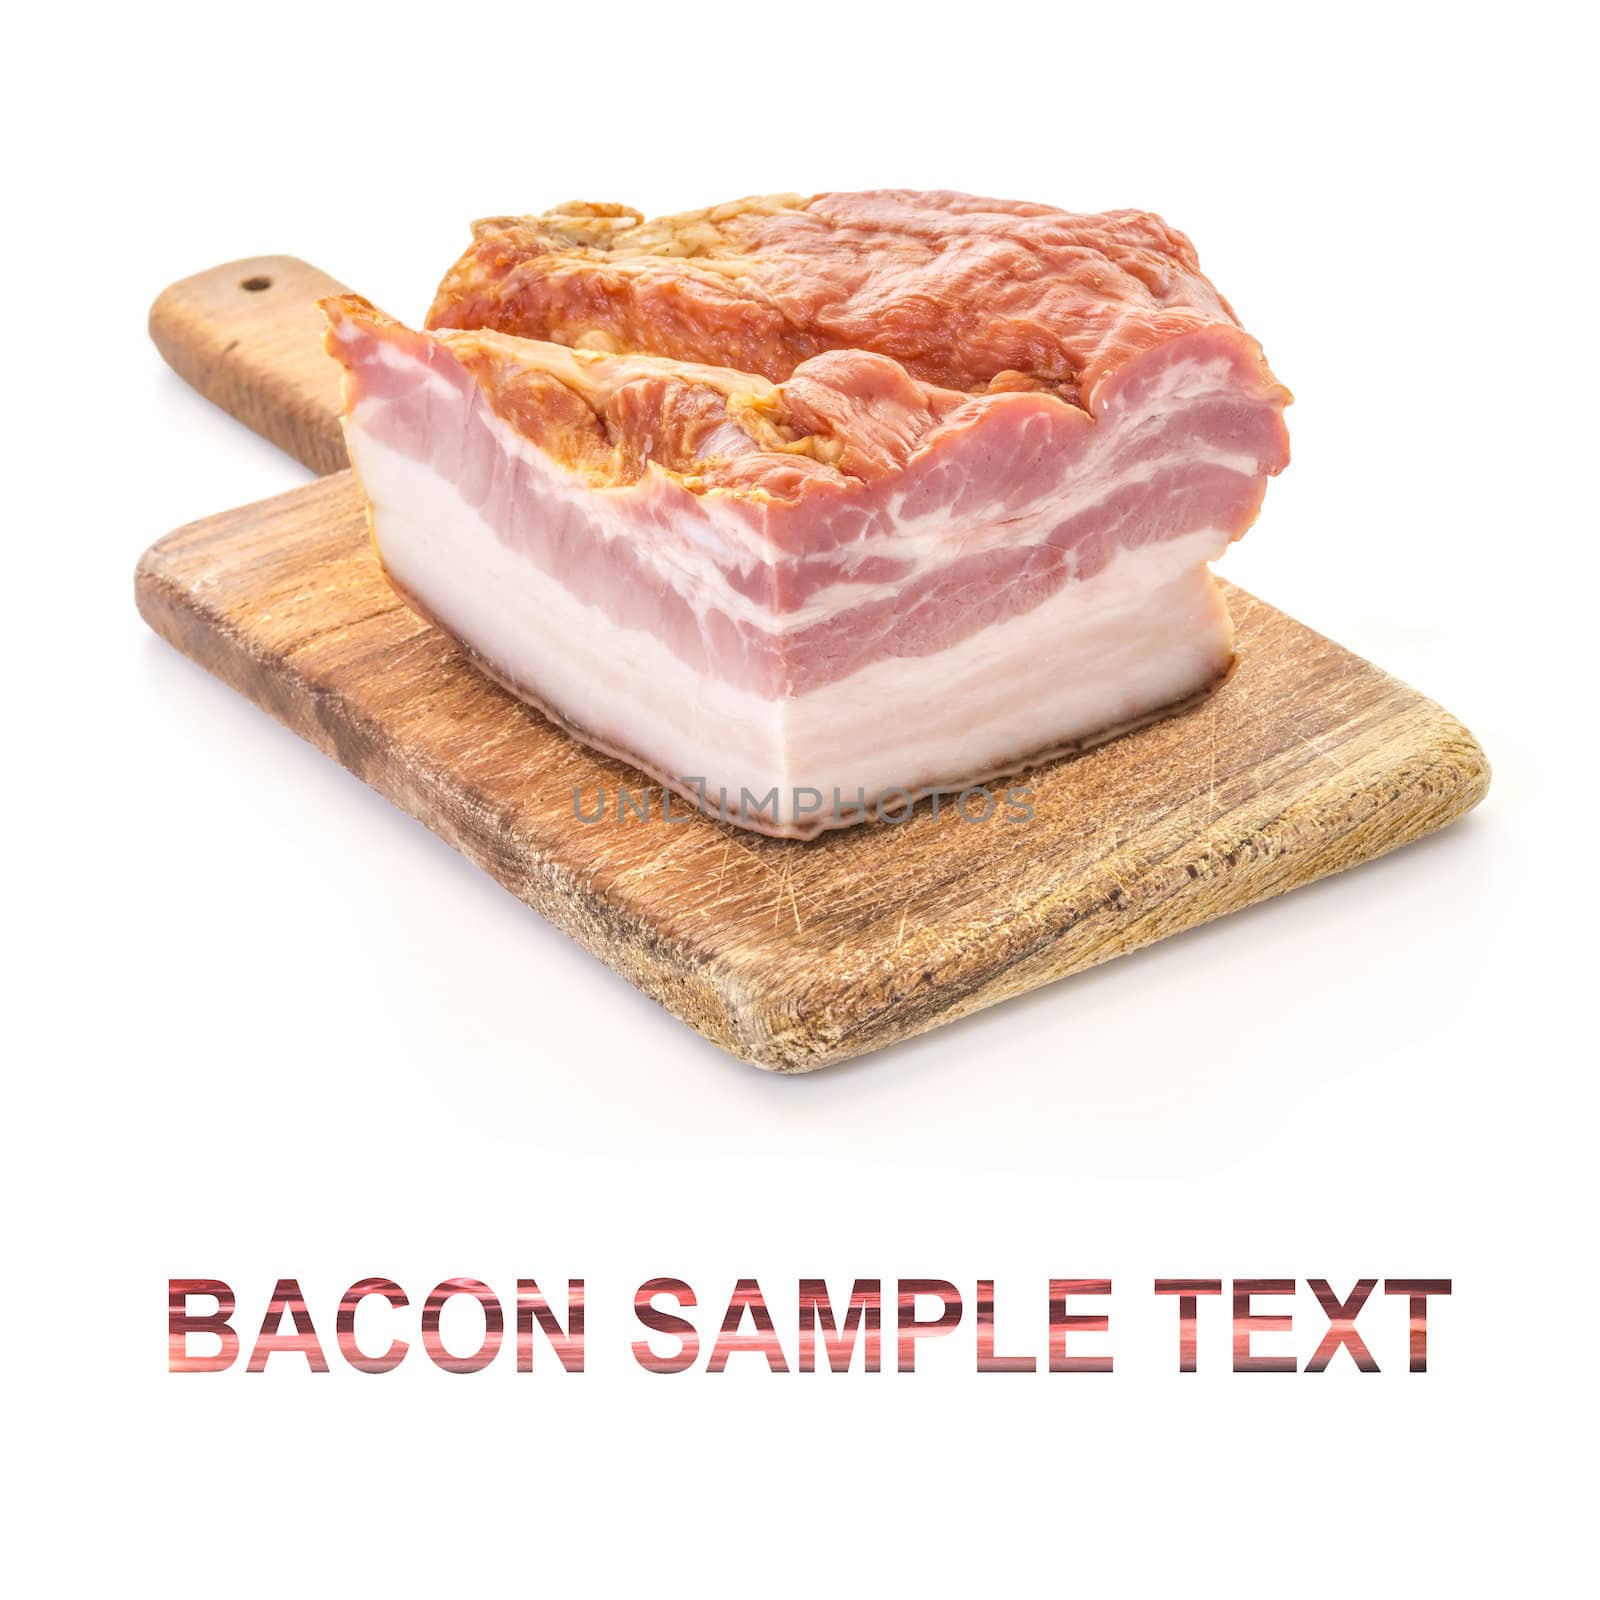 Smoked Bacon on Old Wooden Cutting Board with copy space over white